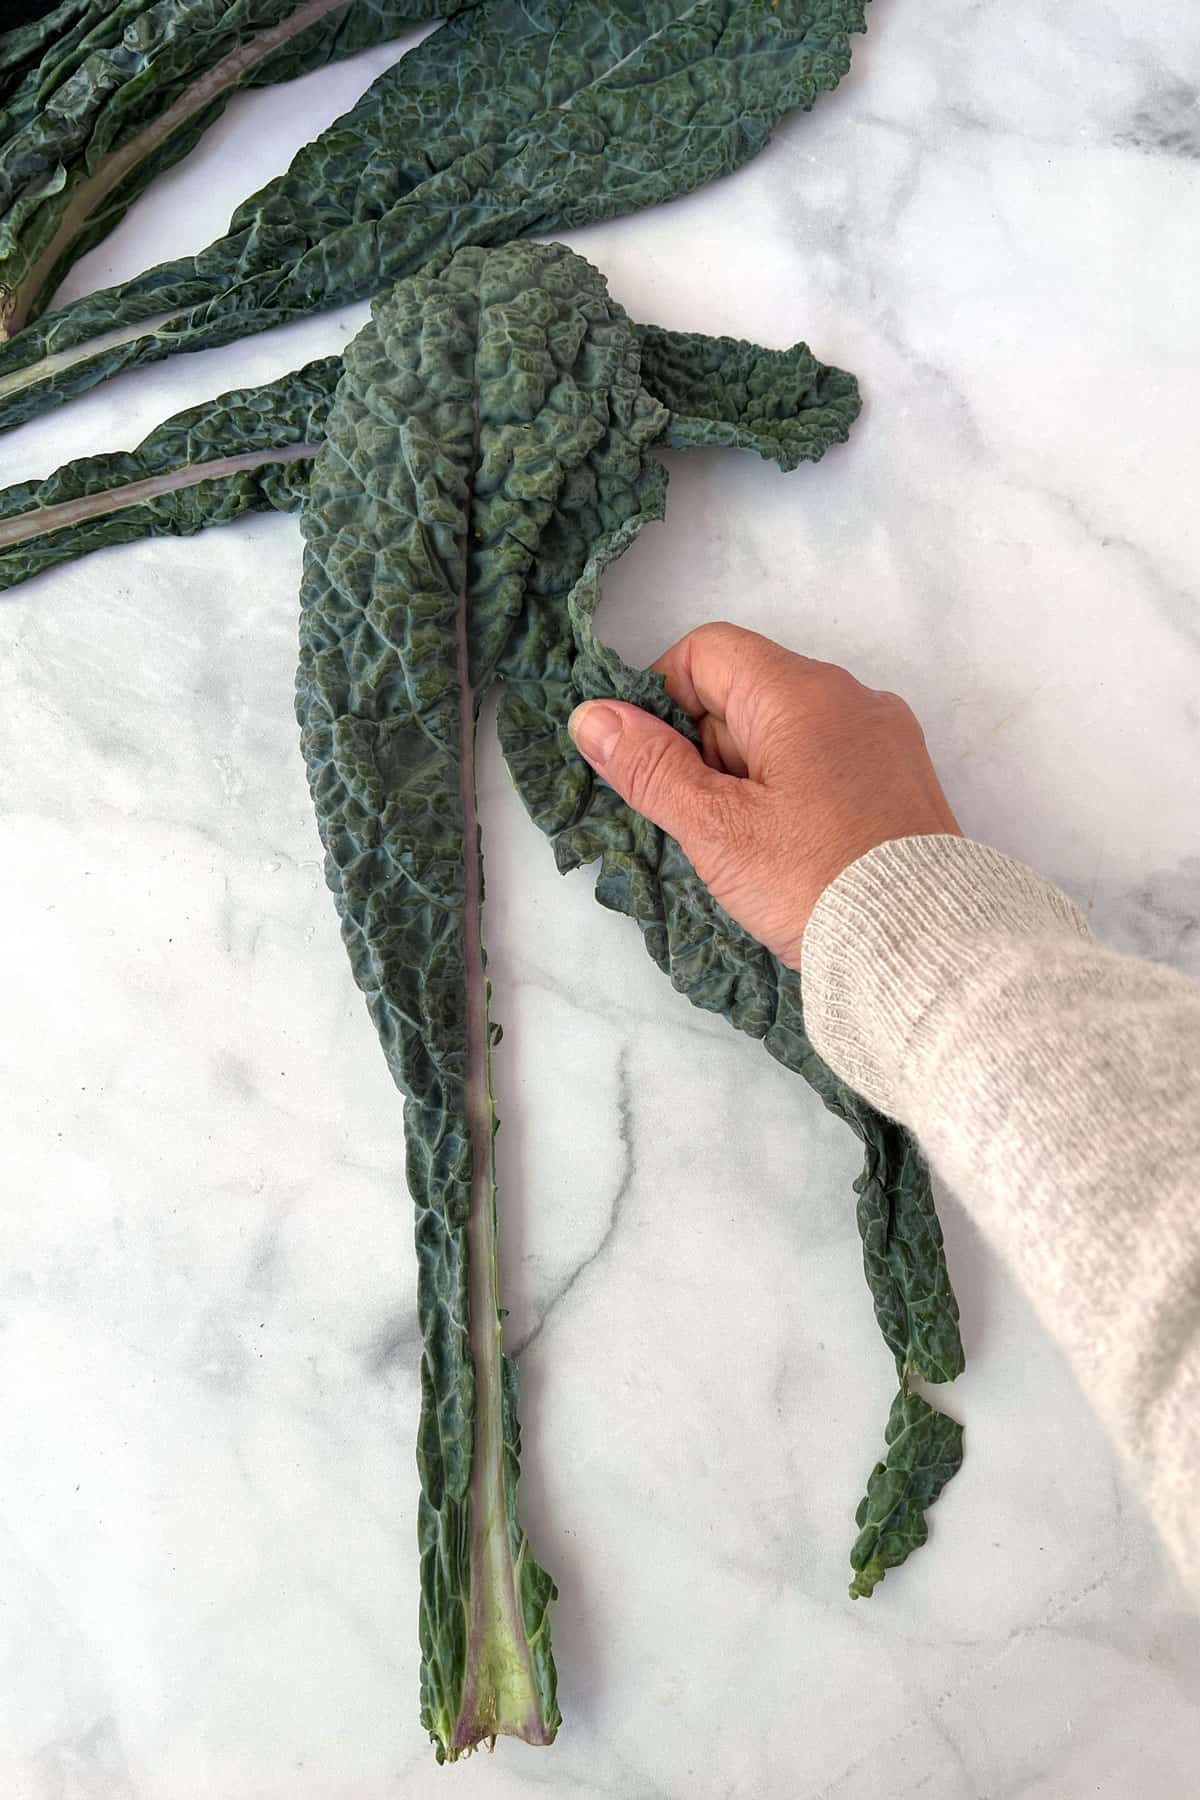 hand stripping kale leaves off of the central stalk